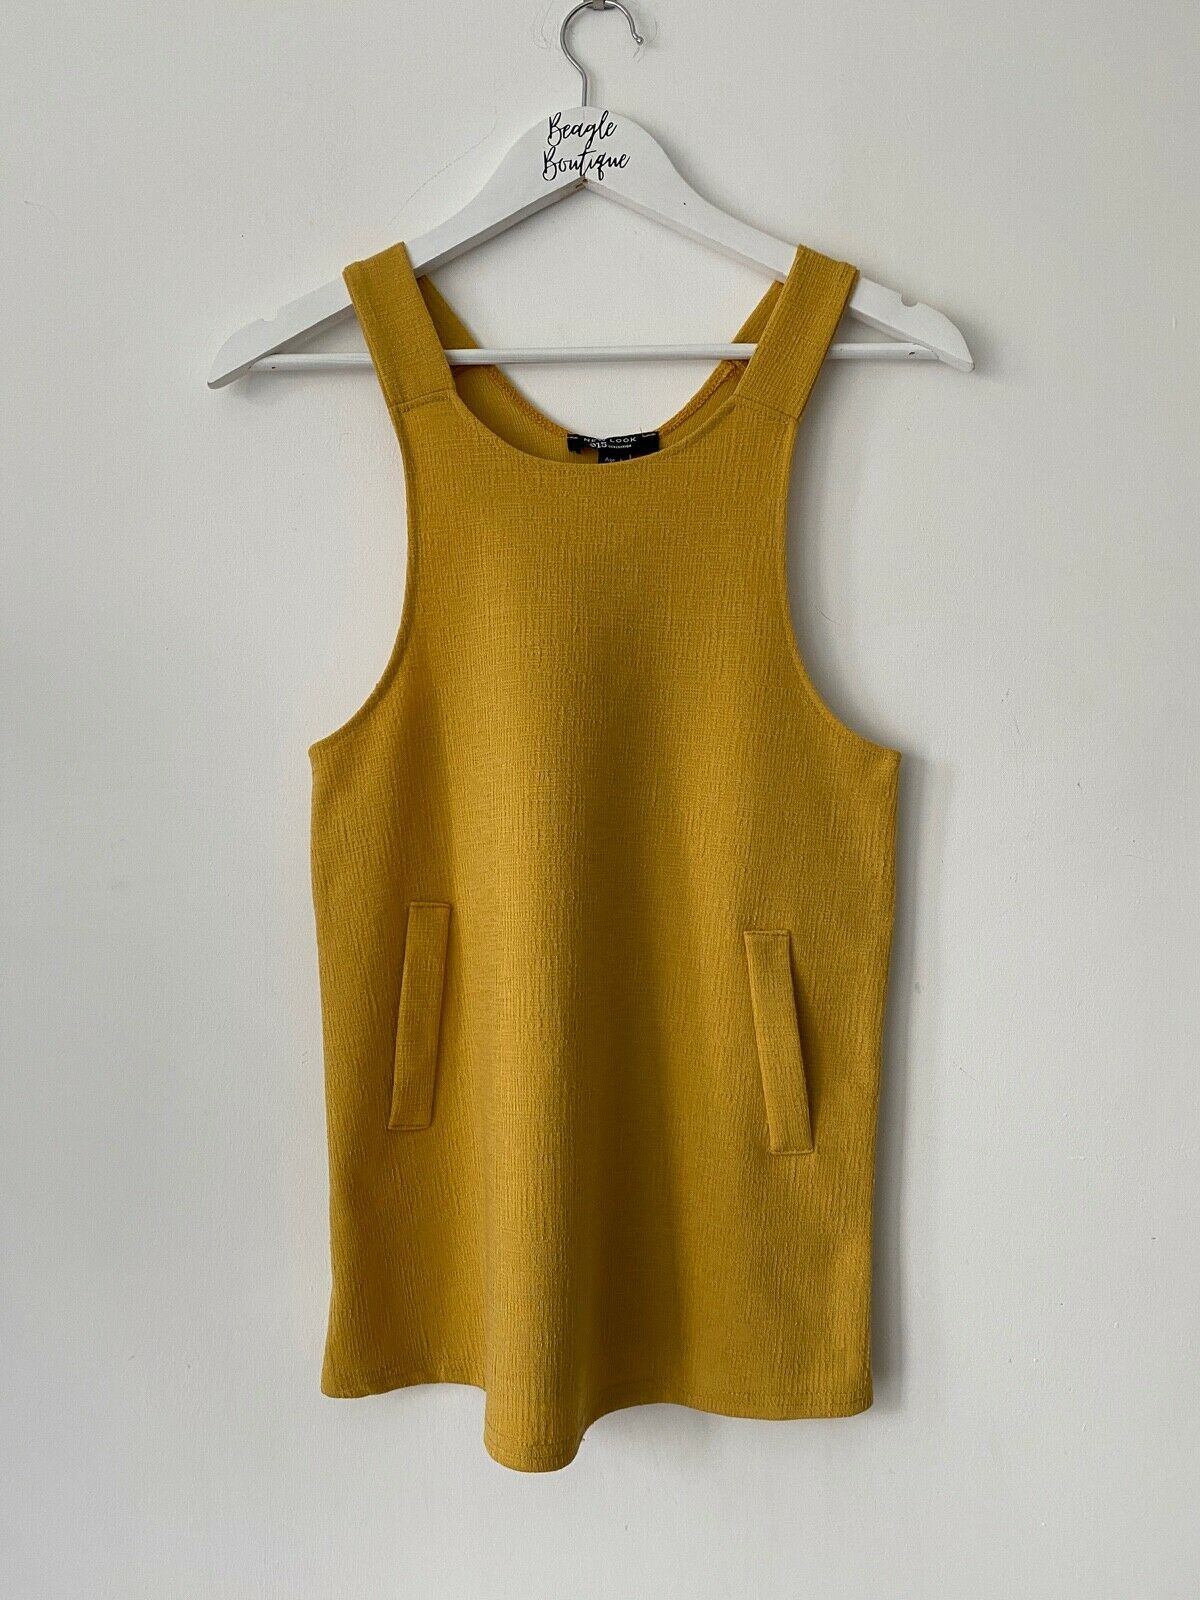 Girls 915 Generation New Look Yellow Ponte Pinny Dress Age 9 Years Old